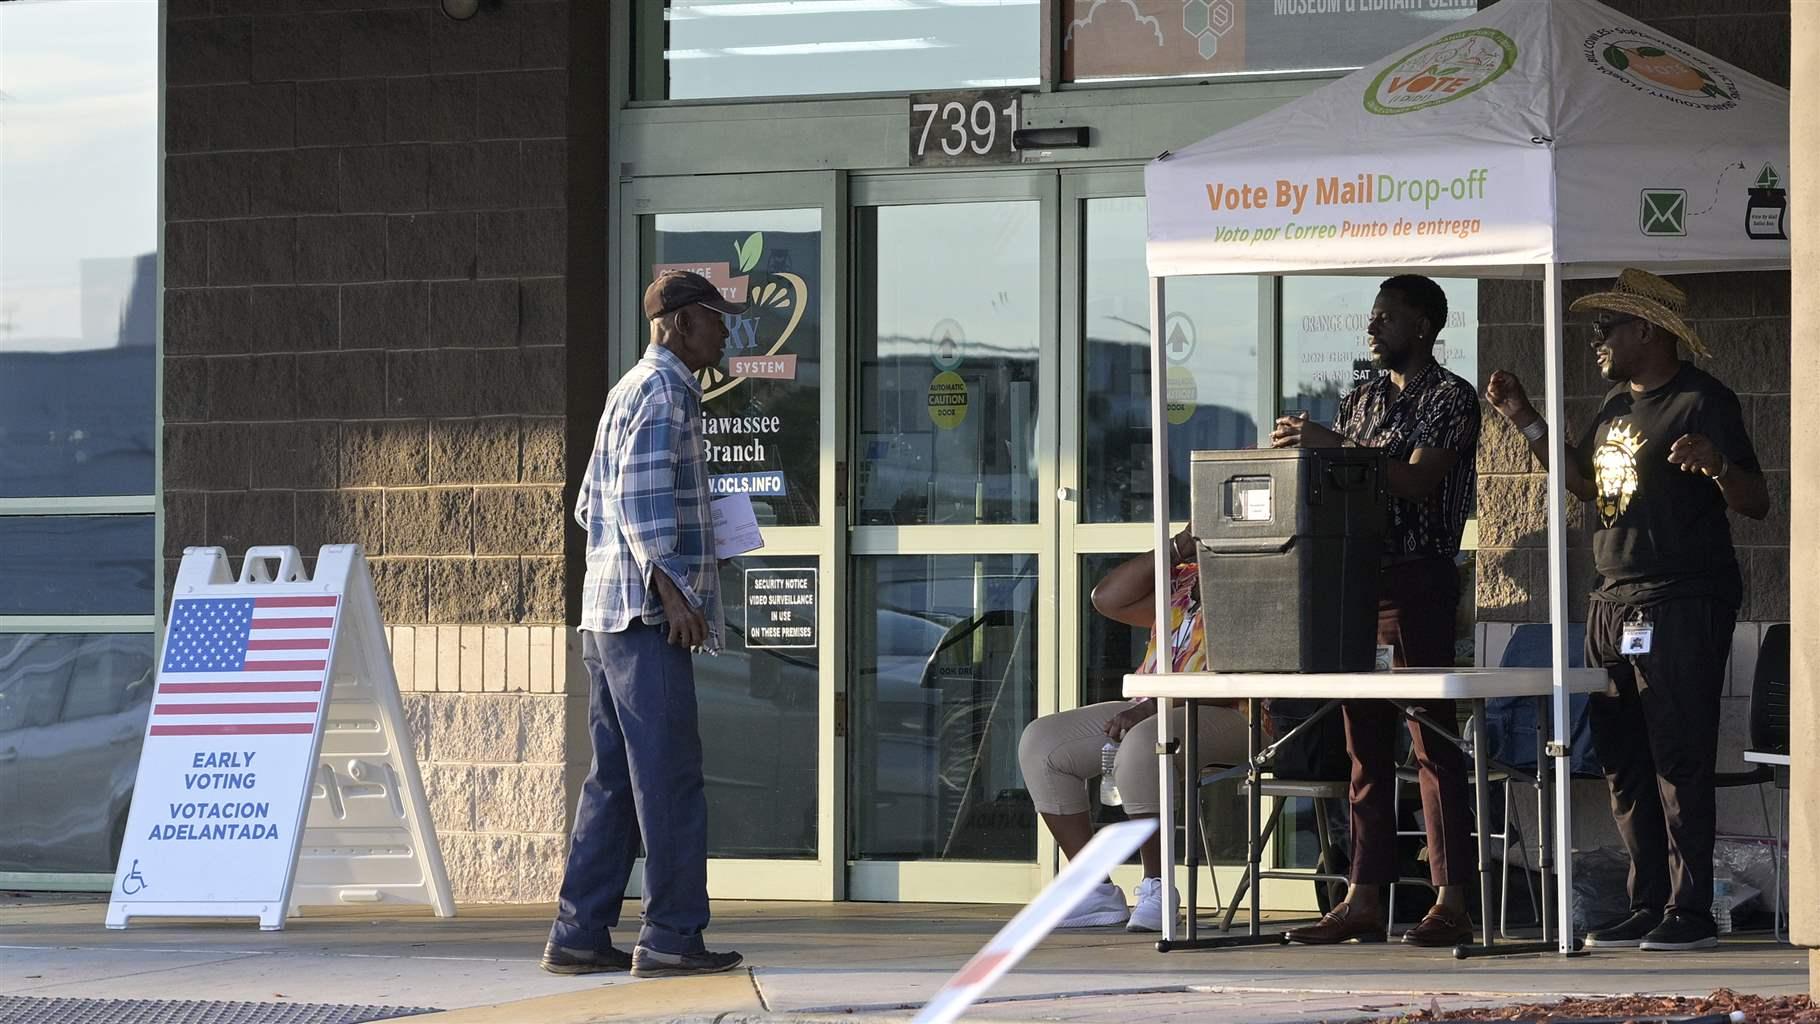 Poll workers man a drop-off ballot box outside an early voting location at a branch of the Orange County Public Library, Wednesday, Oct. 26, 2022, in Orlando, Fla. (Phelan M. Ebenhack via AP)